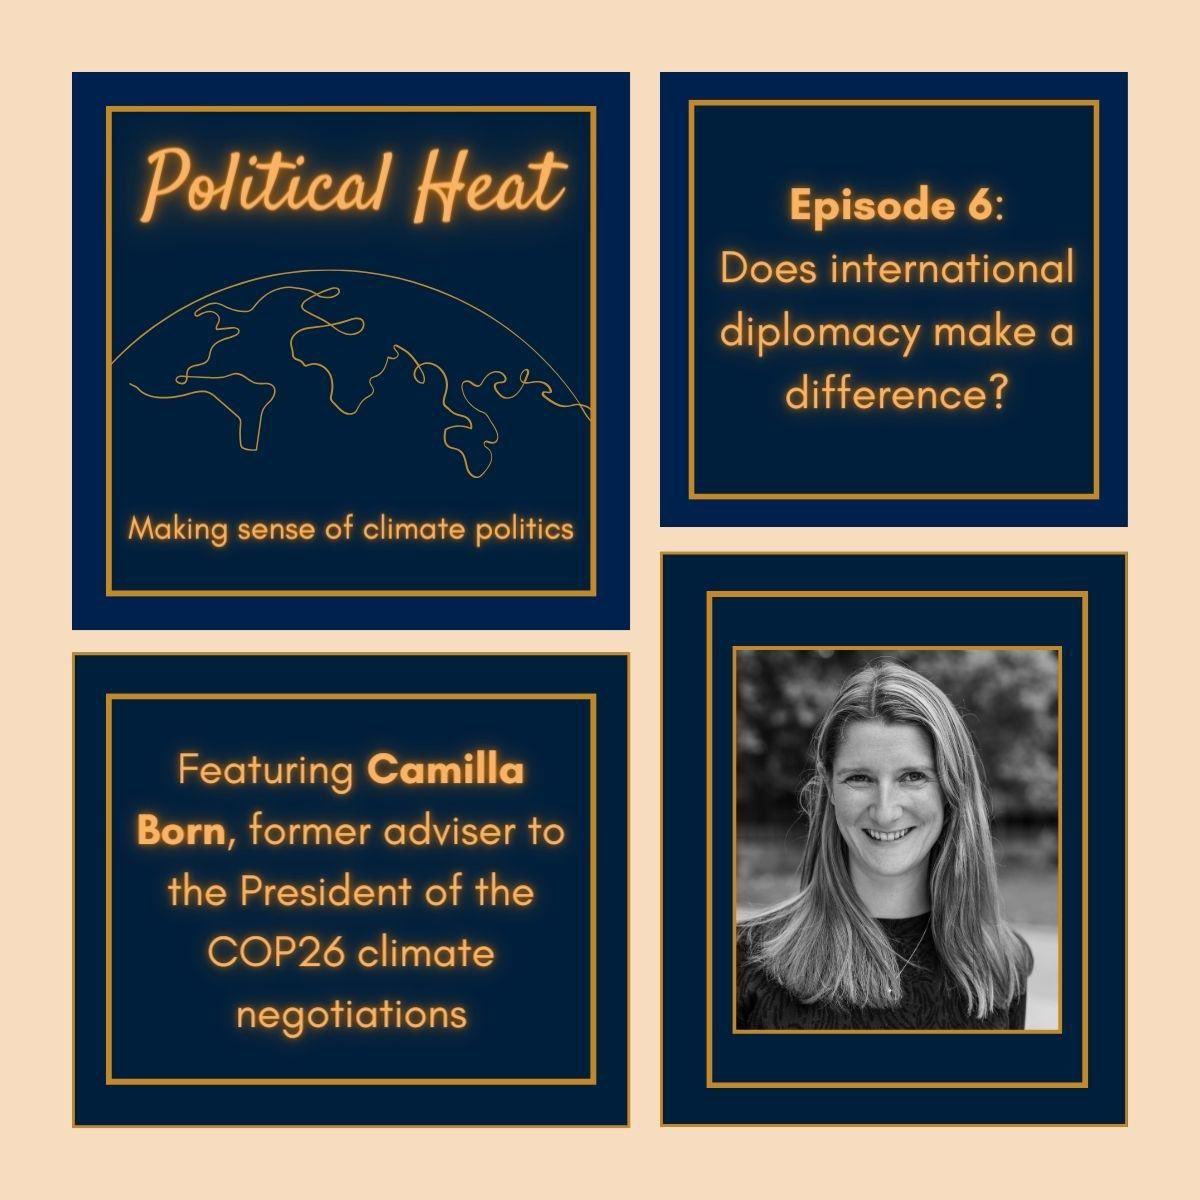 What’s it like to negotiate climate agreements? What are the power dynamics? And how does climate sit alongside other #ForeignPolicy objectives? @camillaborn shares fascinating insights from the world of #diplomacy & her time leading strategy for COP26 political-heat.captivate.fm